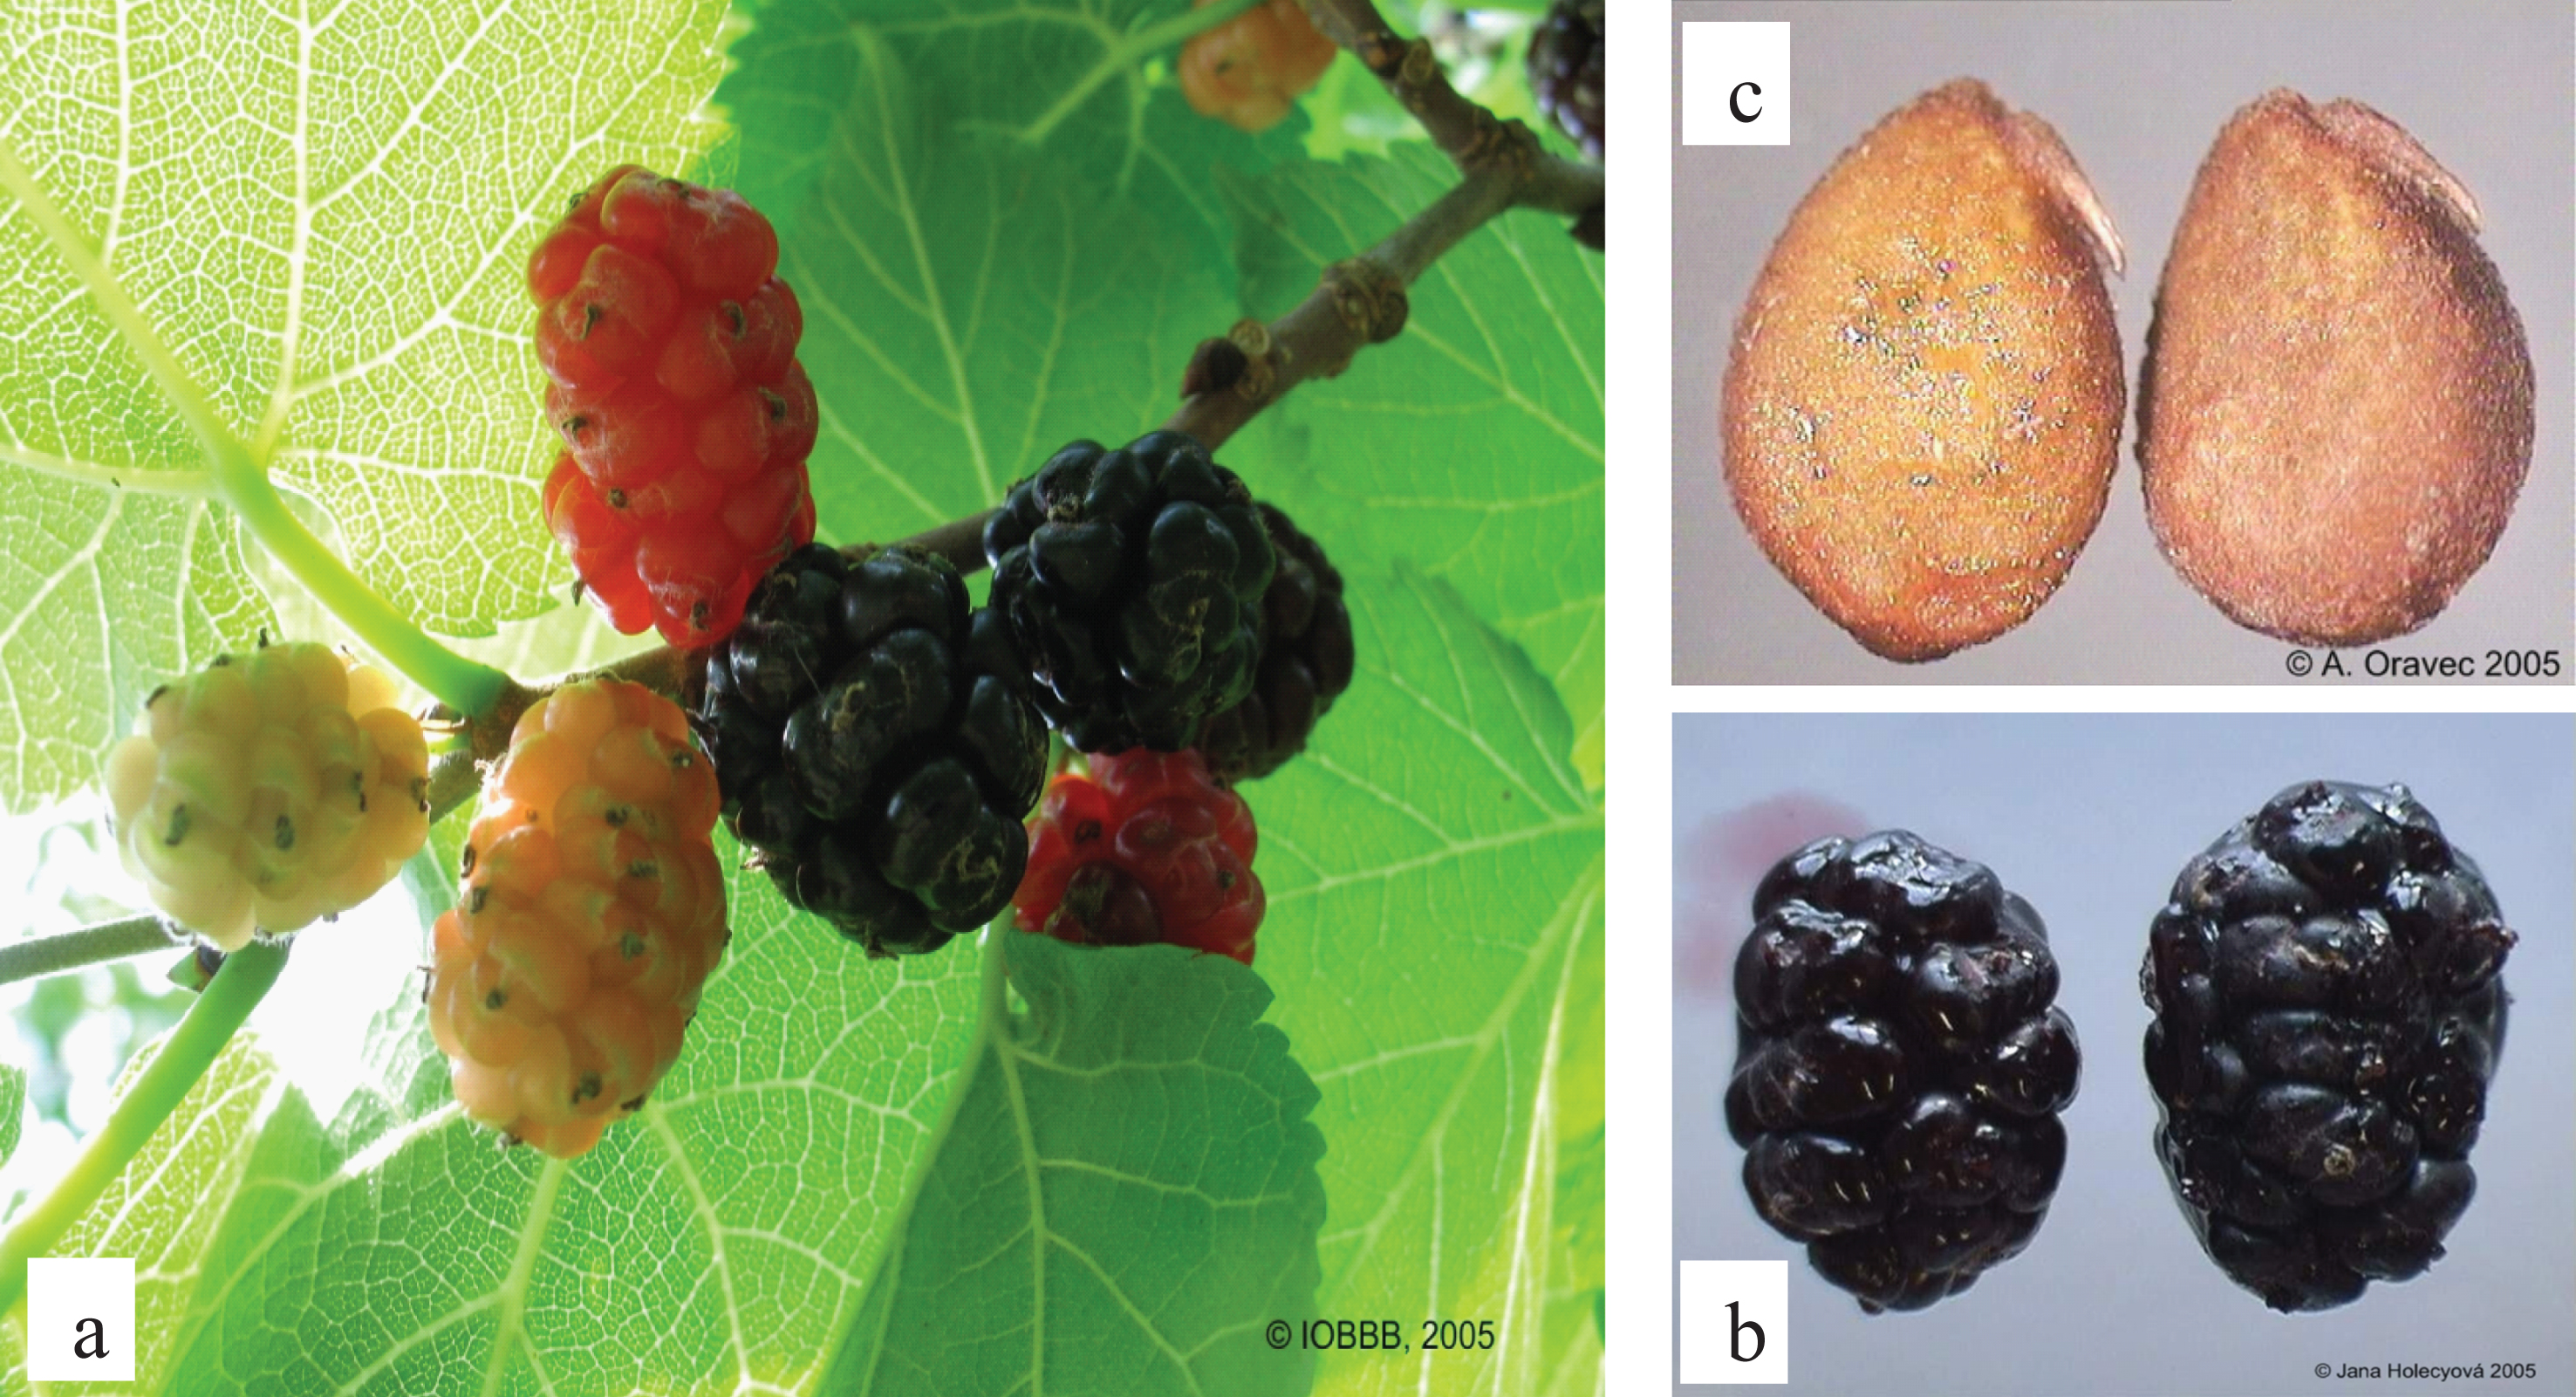 The gradual ripening of the fruit (a), the shape of fruit (b), and seeds (c) of black mulberry (Morus nigra L.). Photo J. Holecyova and A. Oravec.